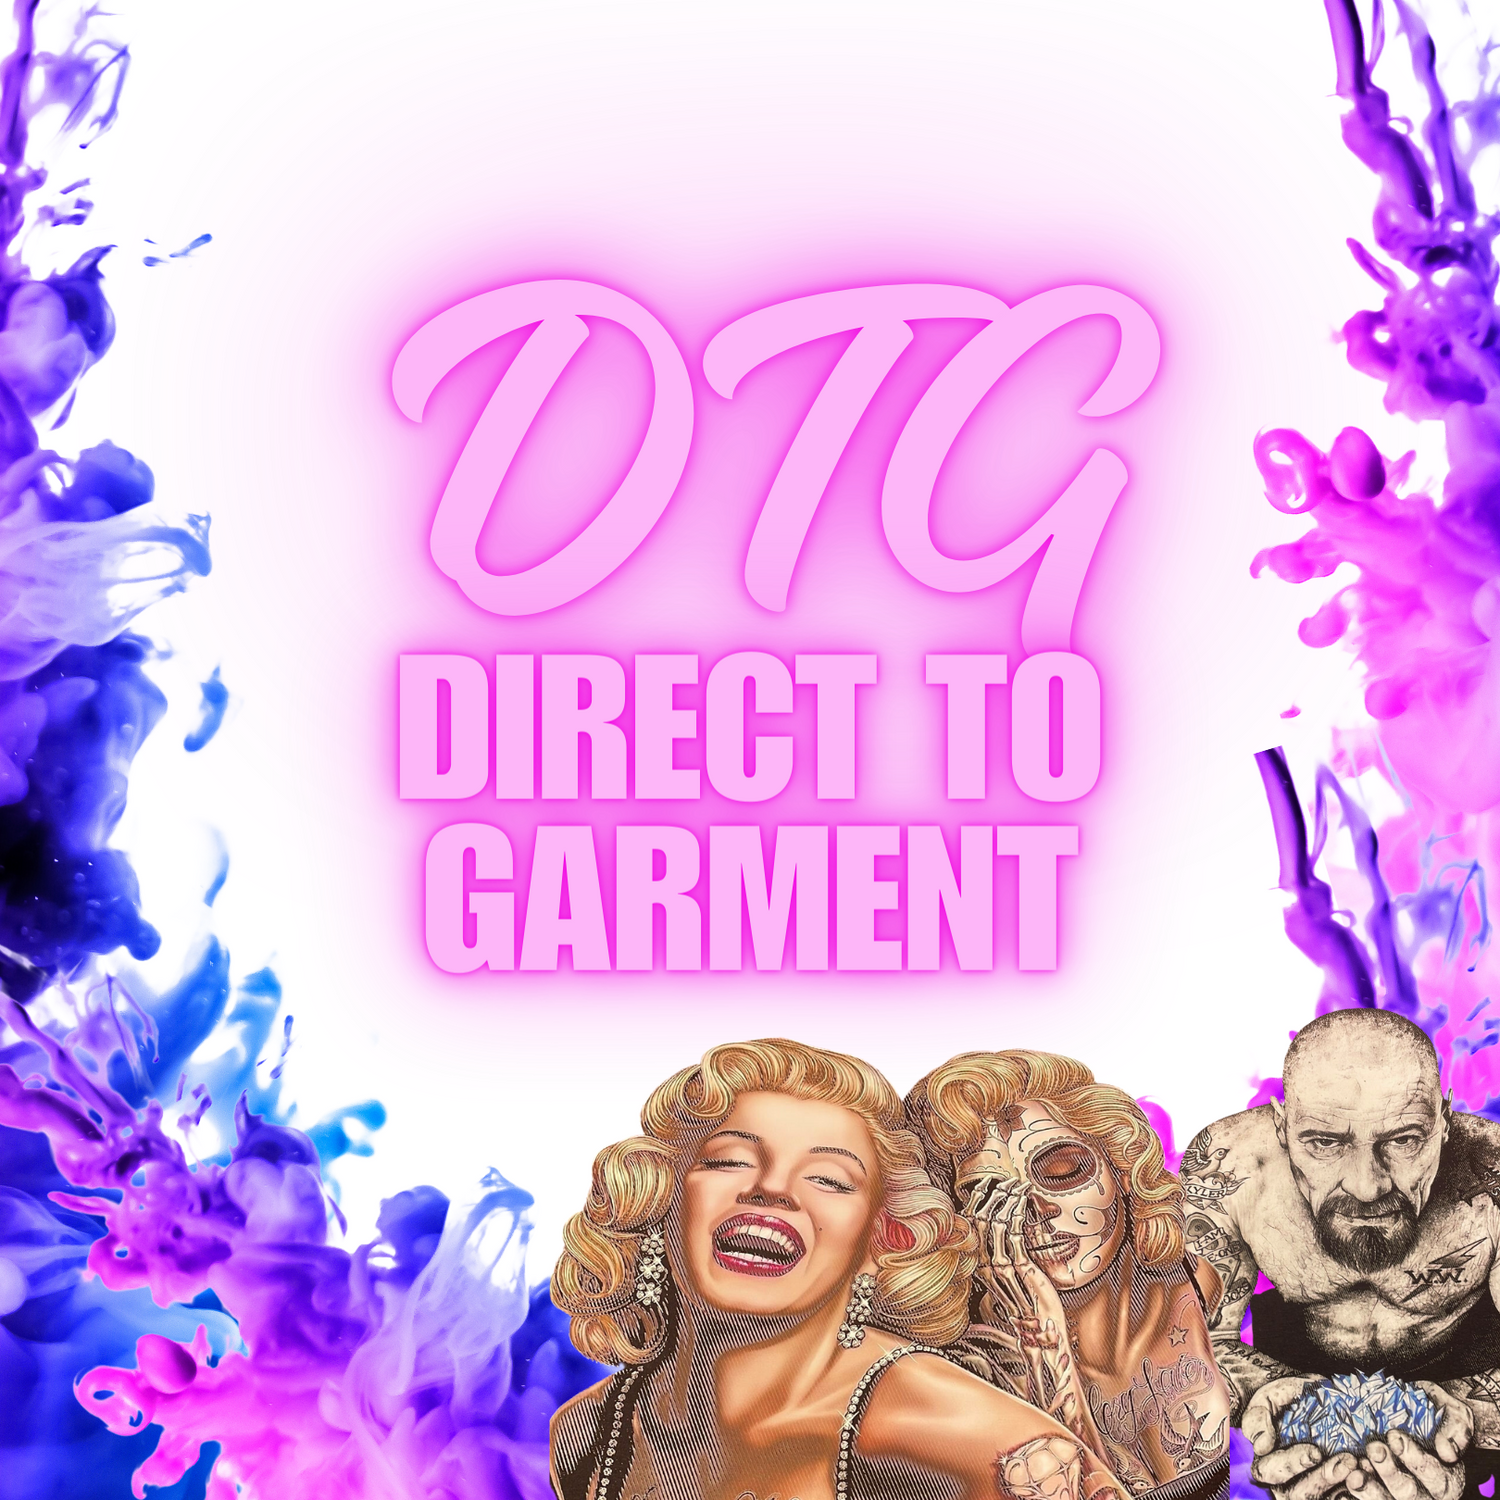 DIRECT TO GARMENT